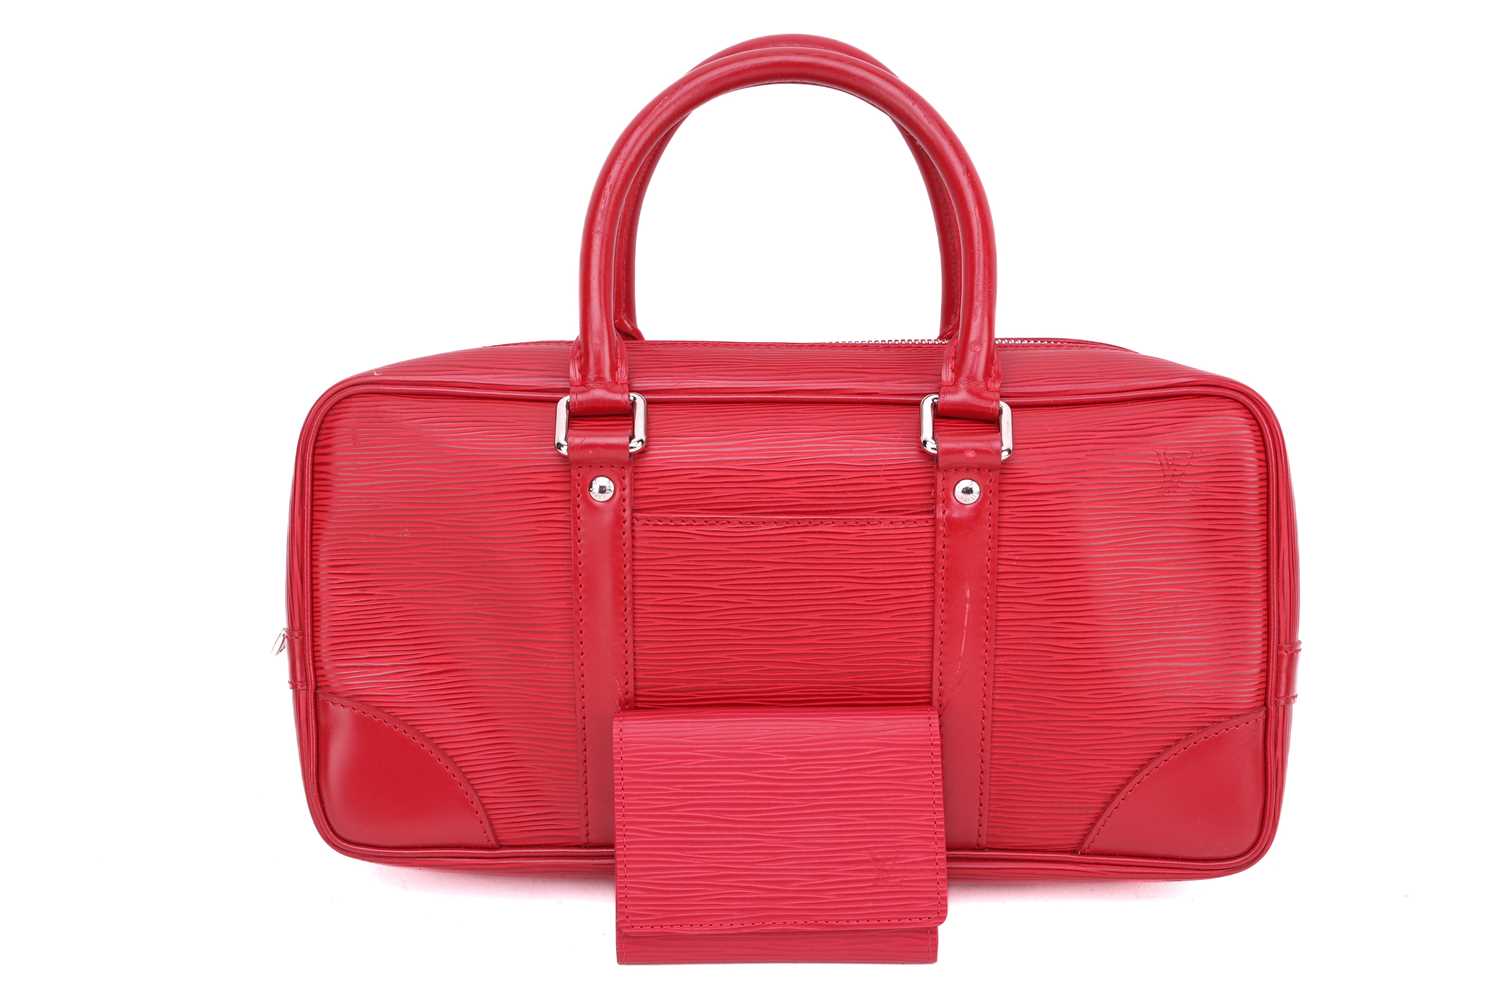 Lot 353 - A Louis Vuitton red epi-leather handbag with